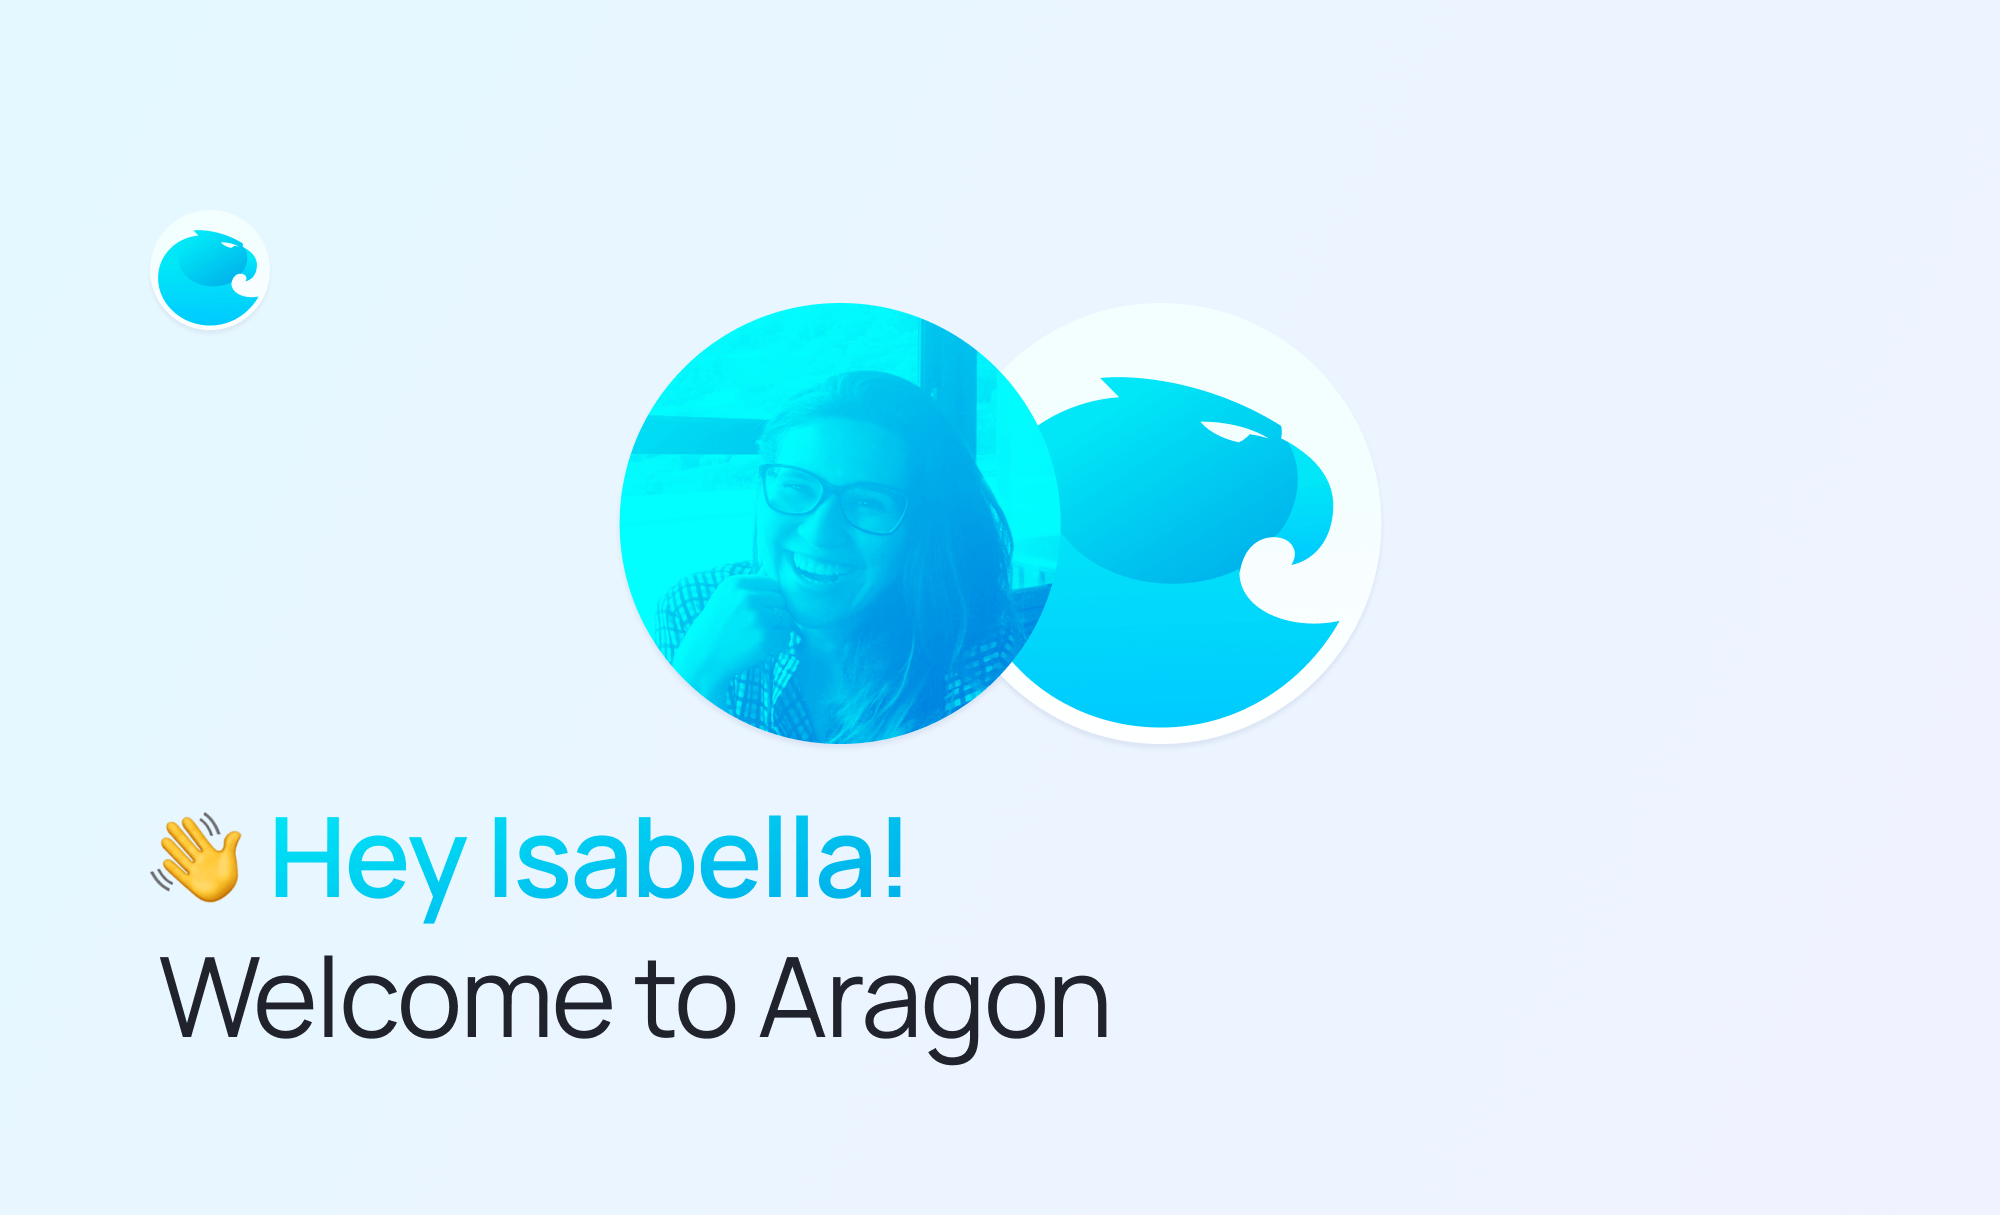 Welcoming Isabella de Brito as the Community Lead of the Aragon Association